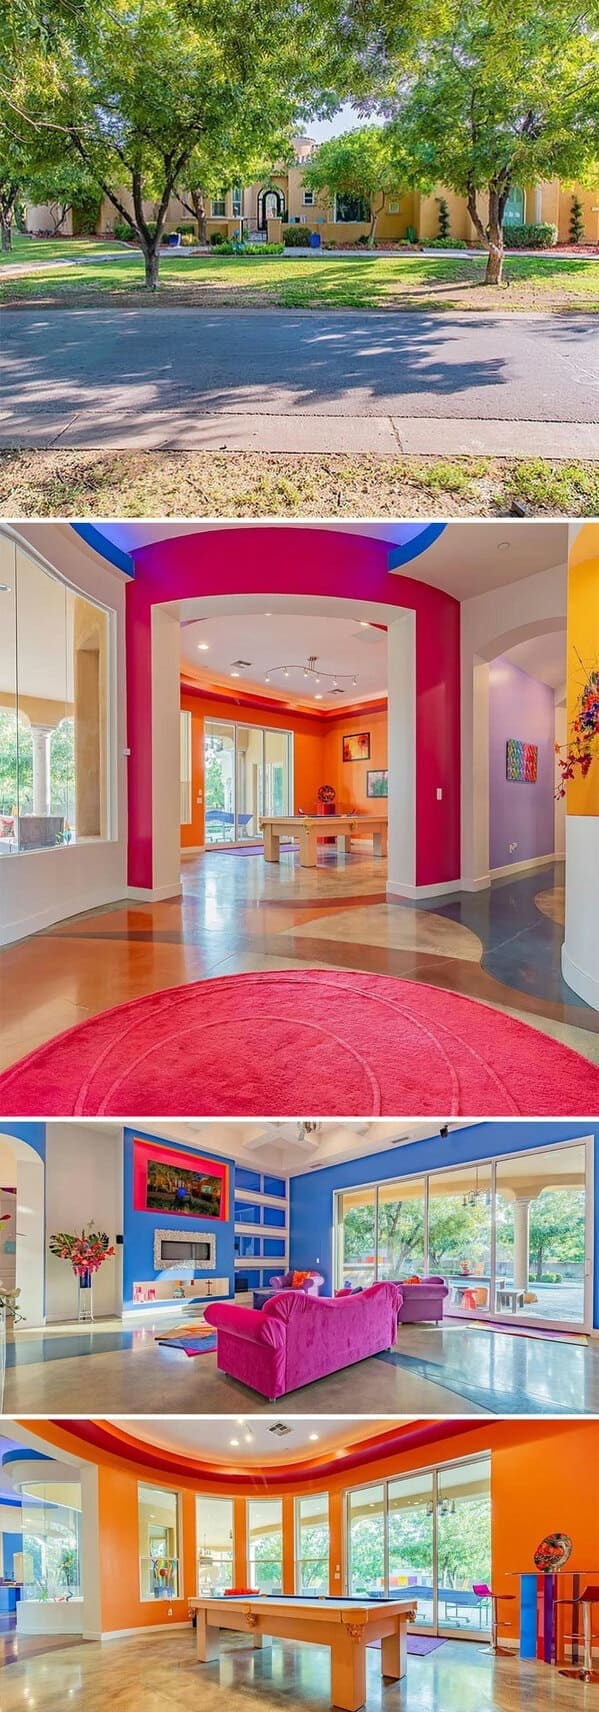 Best of zillowgonewild, Zillow gone wild, Funny weird Zillow listings, houses, strange real estate, funny photos of houses